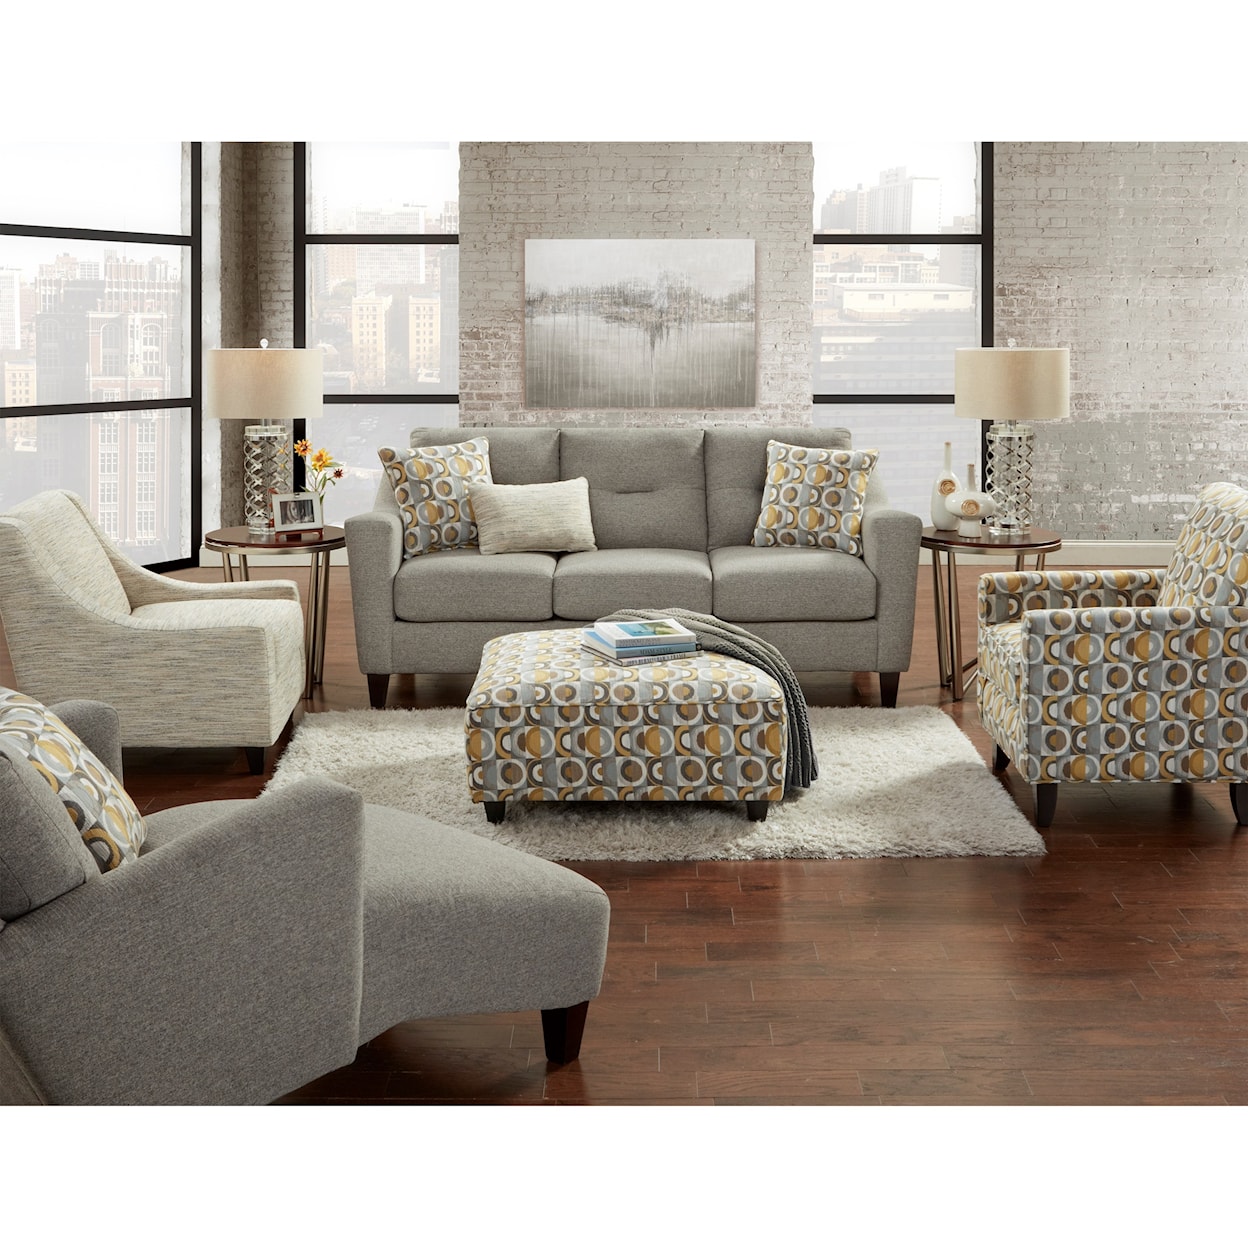 Fusion Furniture 8210-KP DILLIST MICA Living Room Group